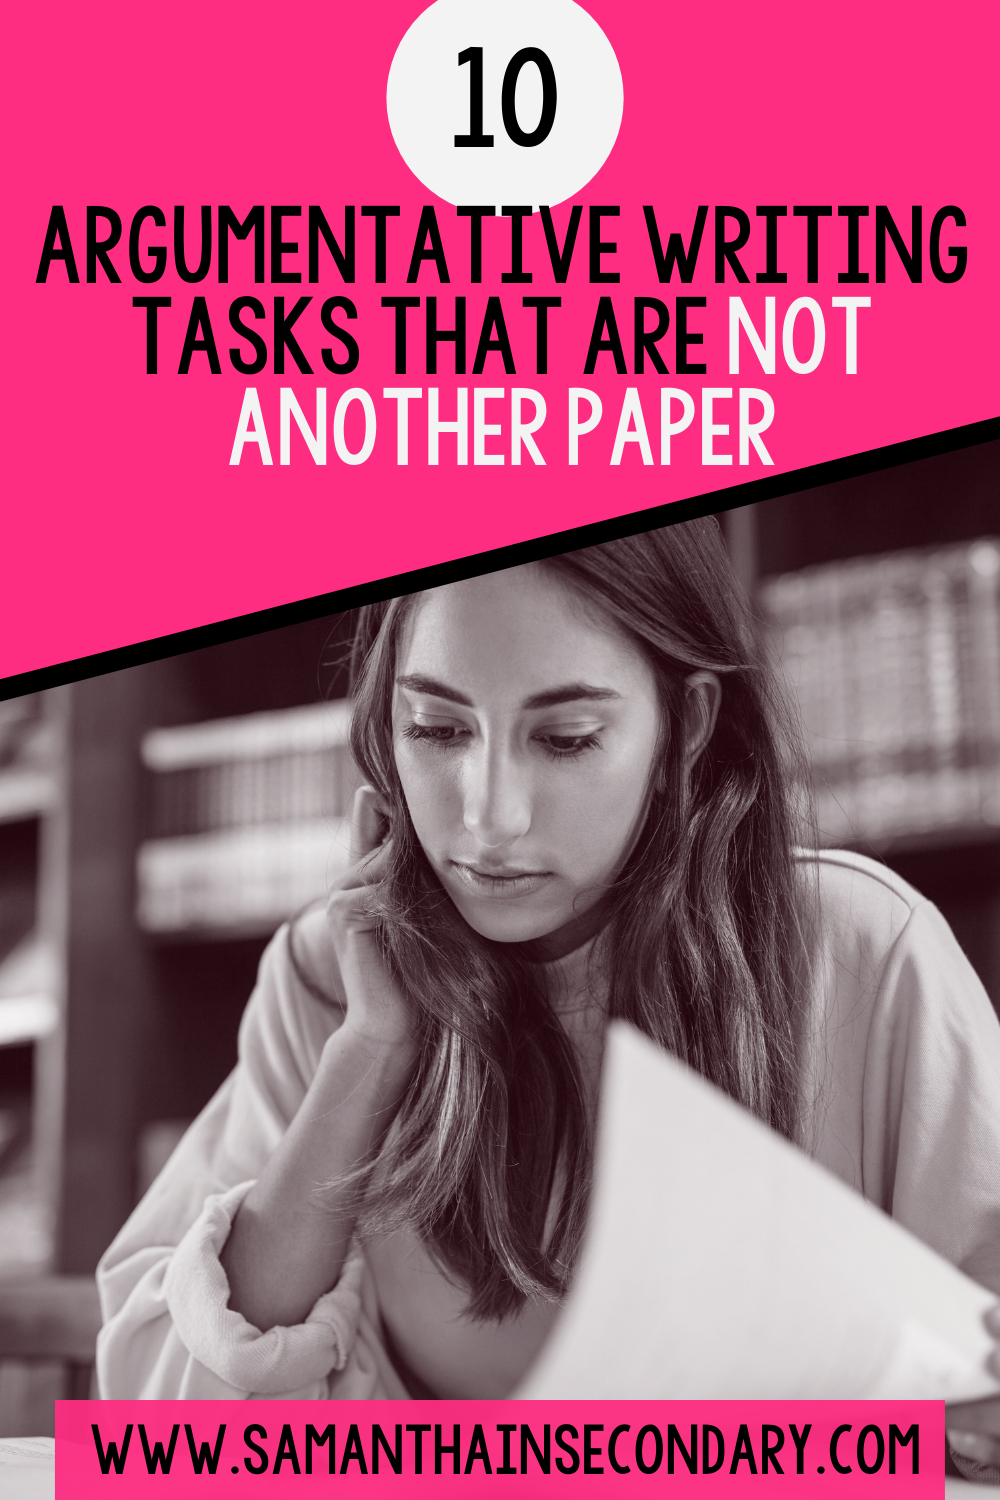 10 argumentative writing tasks that are not another paper pin image